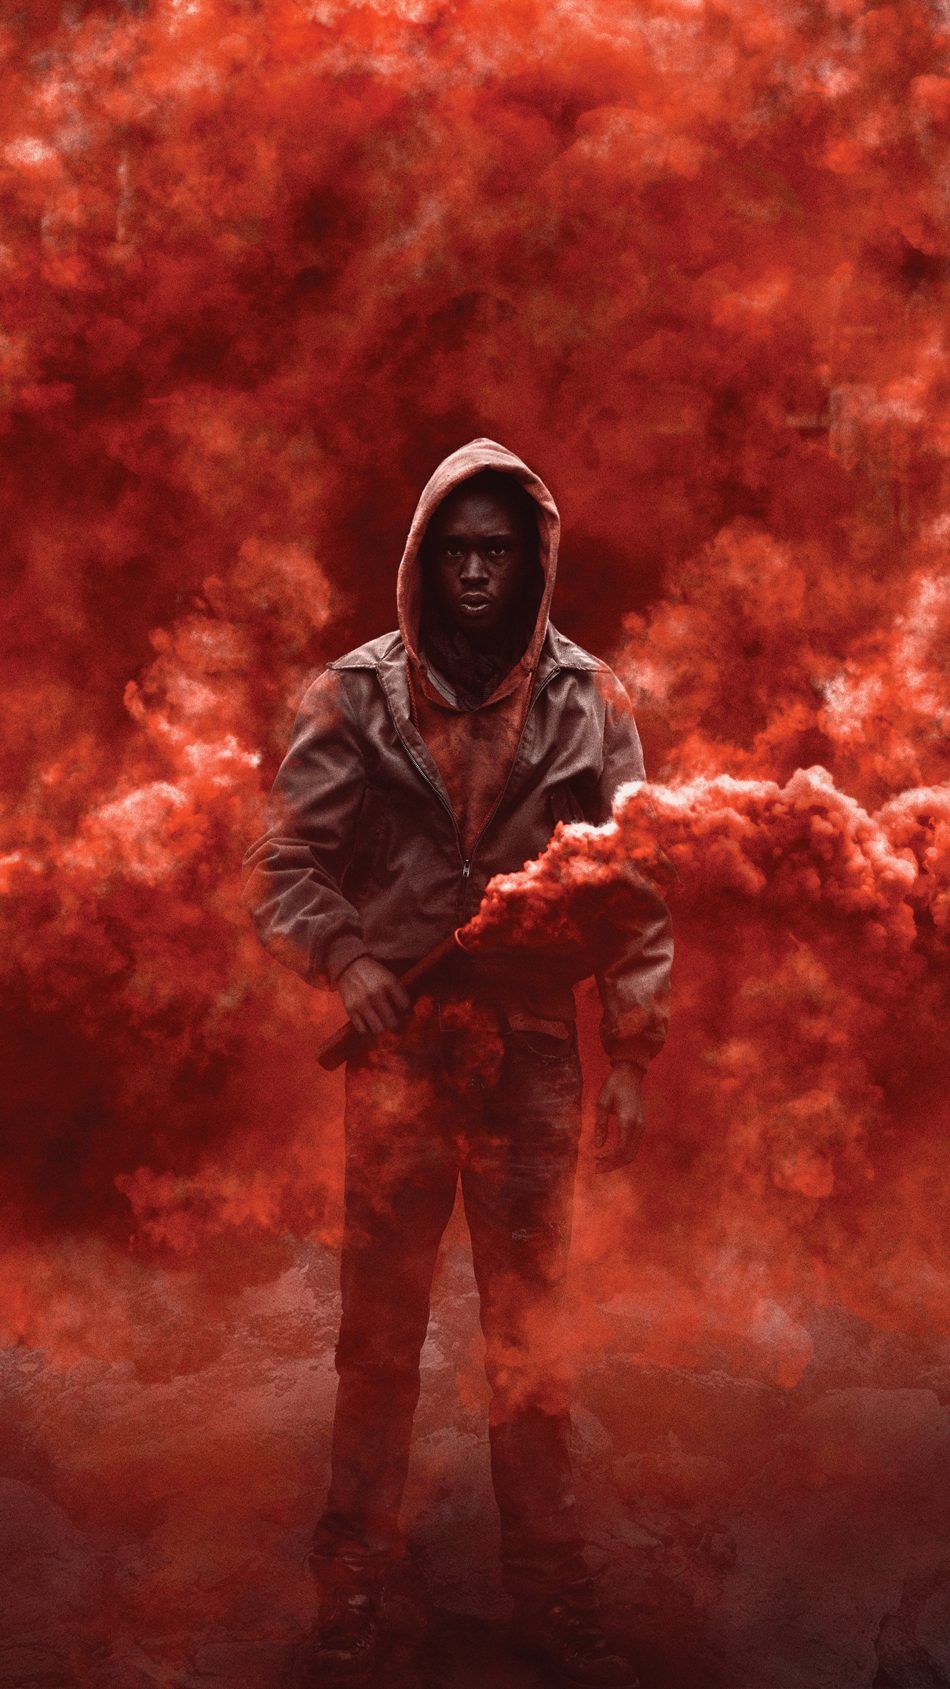 Free download Download Best Quality Captive State 2019 4K UHD